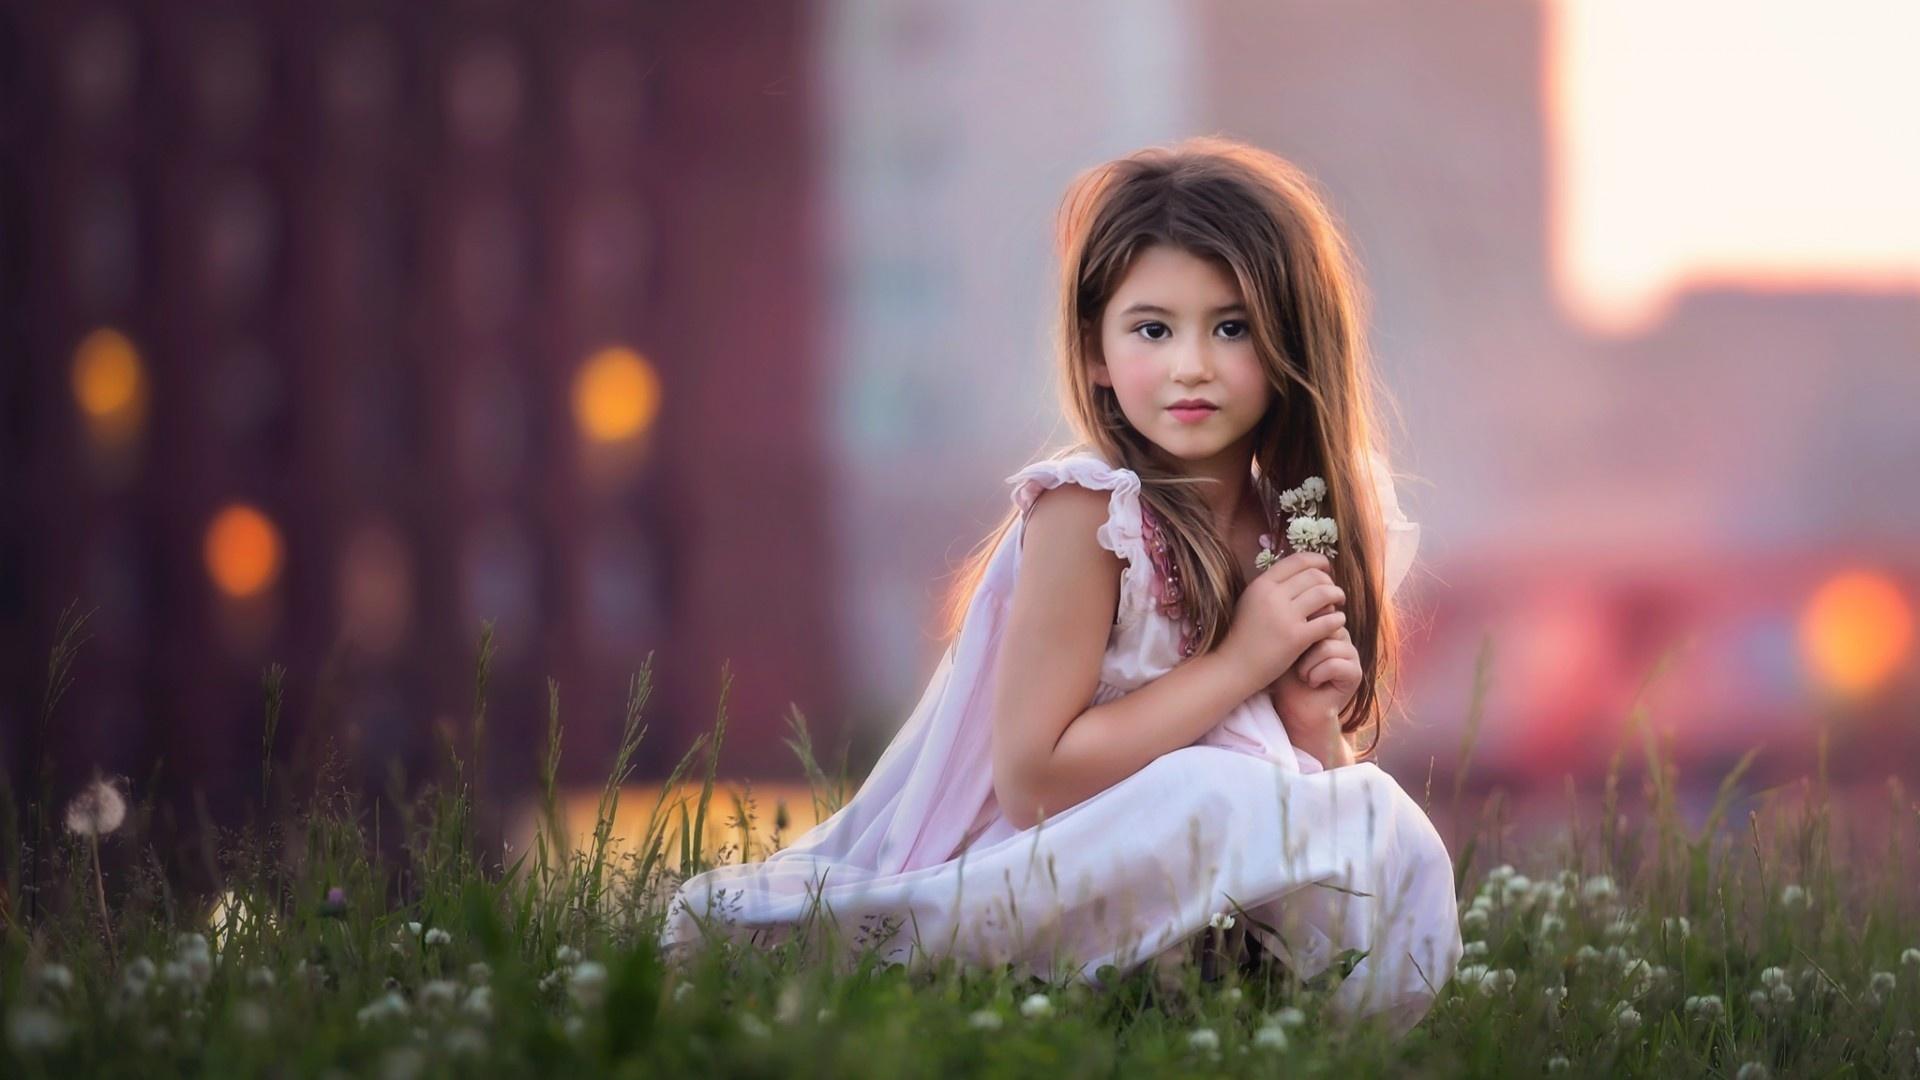 Free photo: Cute little girl, Stare, Young Download